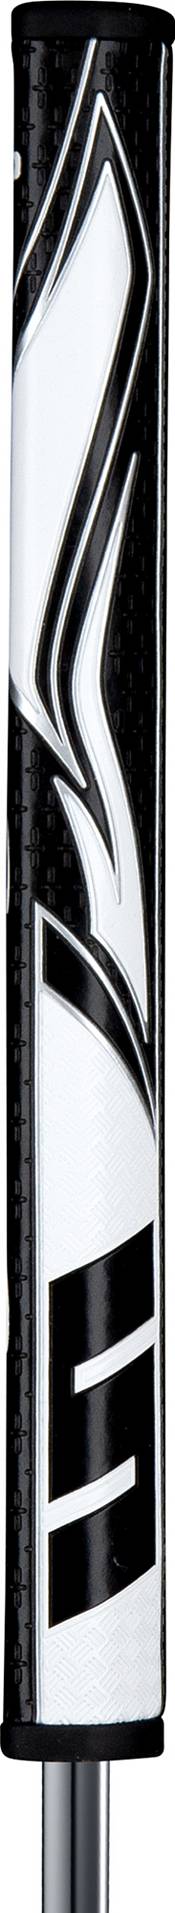 SuperStroke Zenergy Flatso 1.0 Putter Grip product image